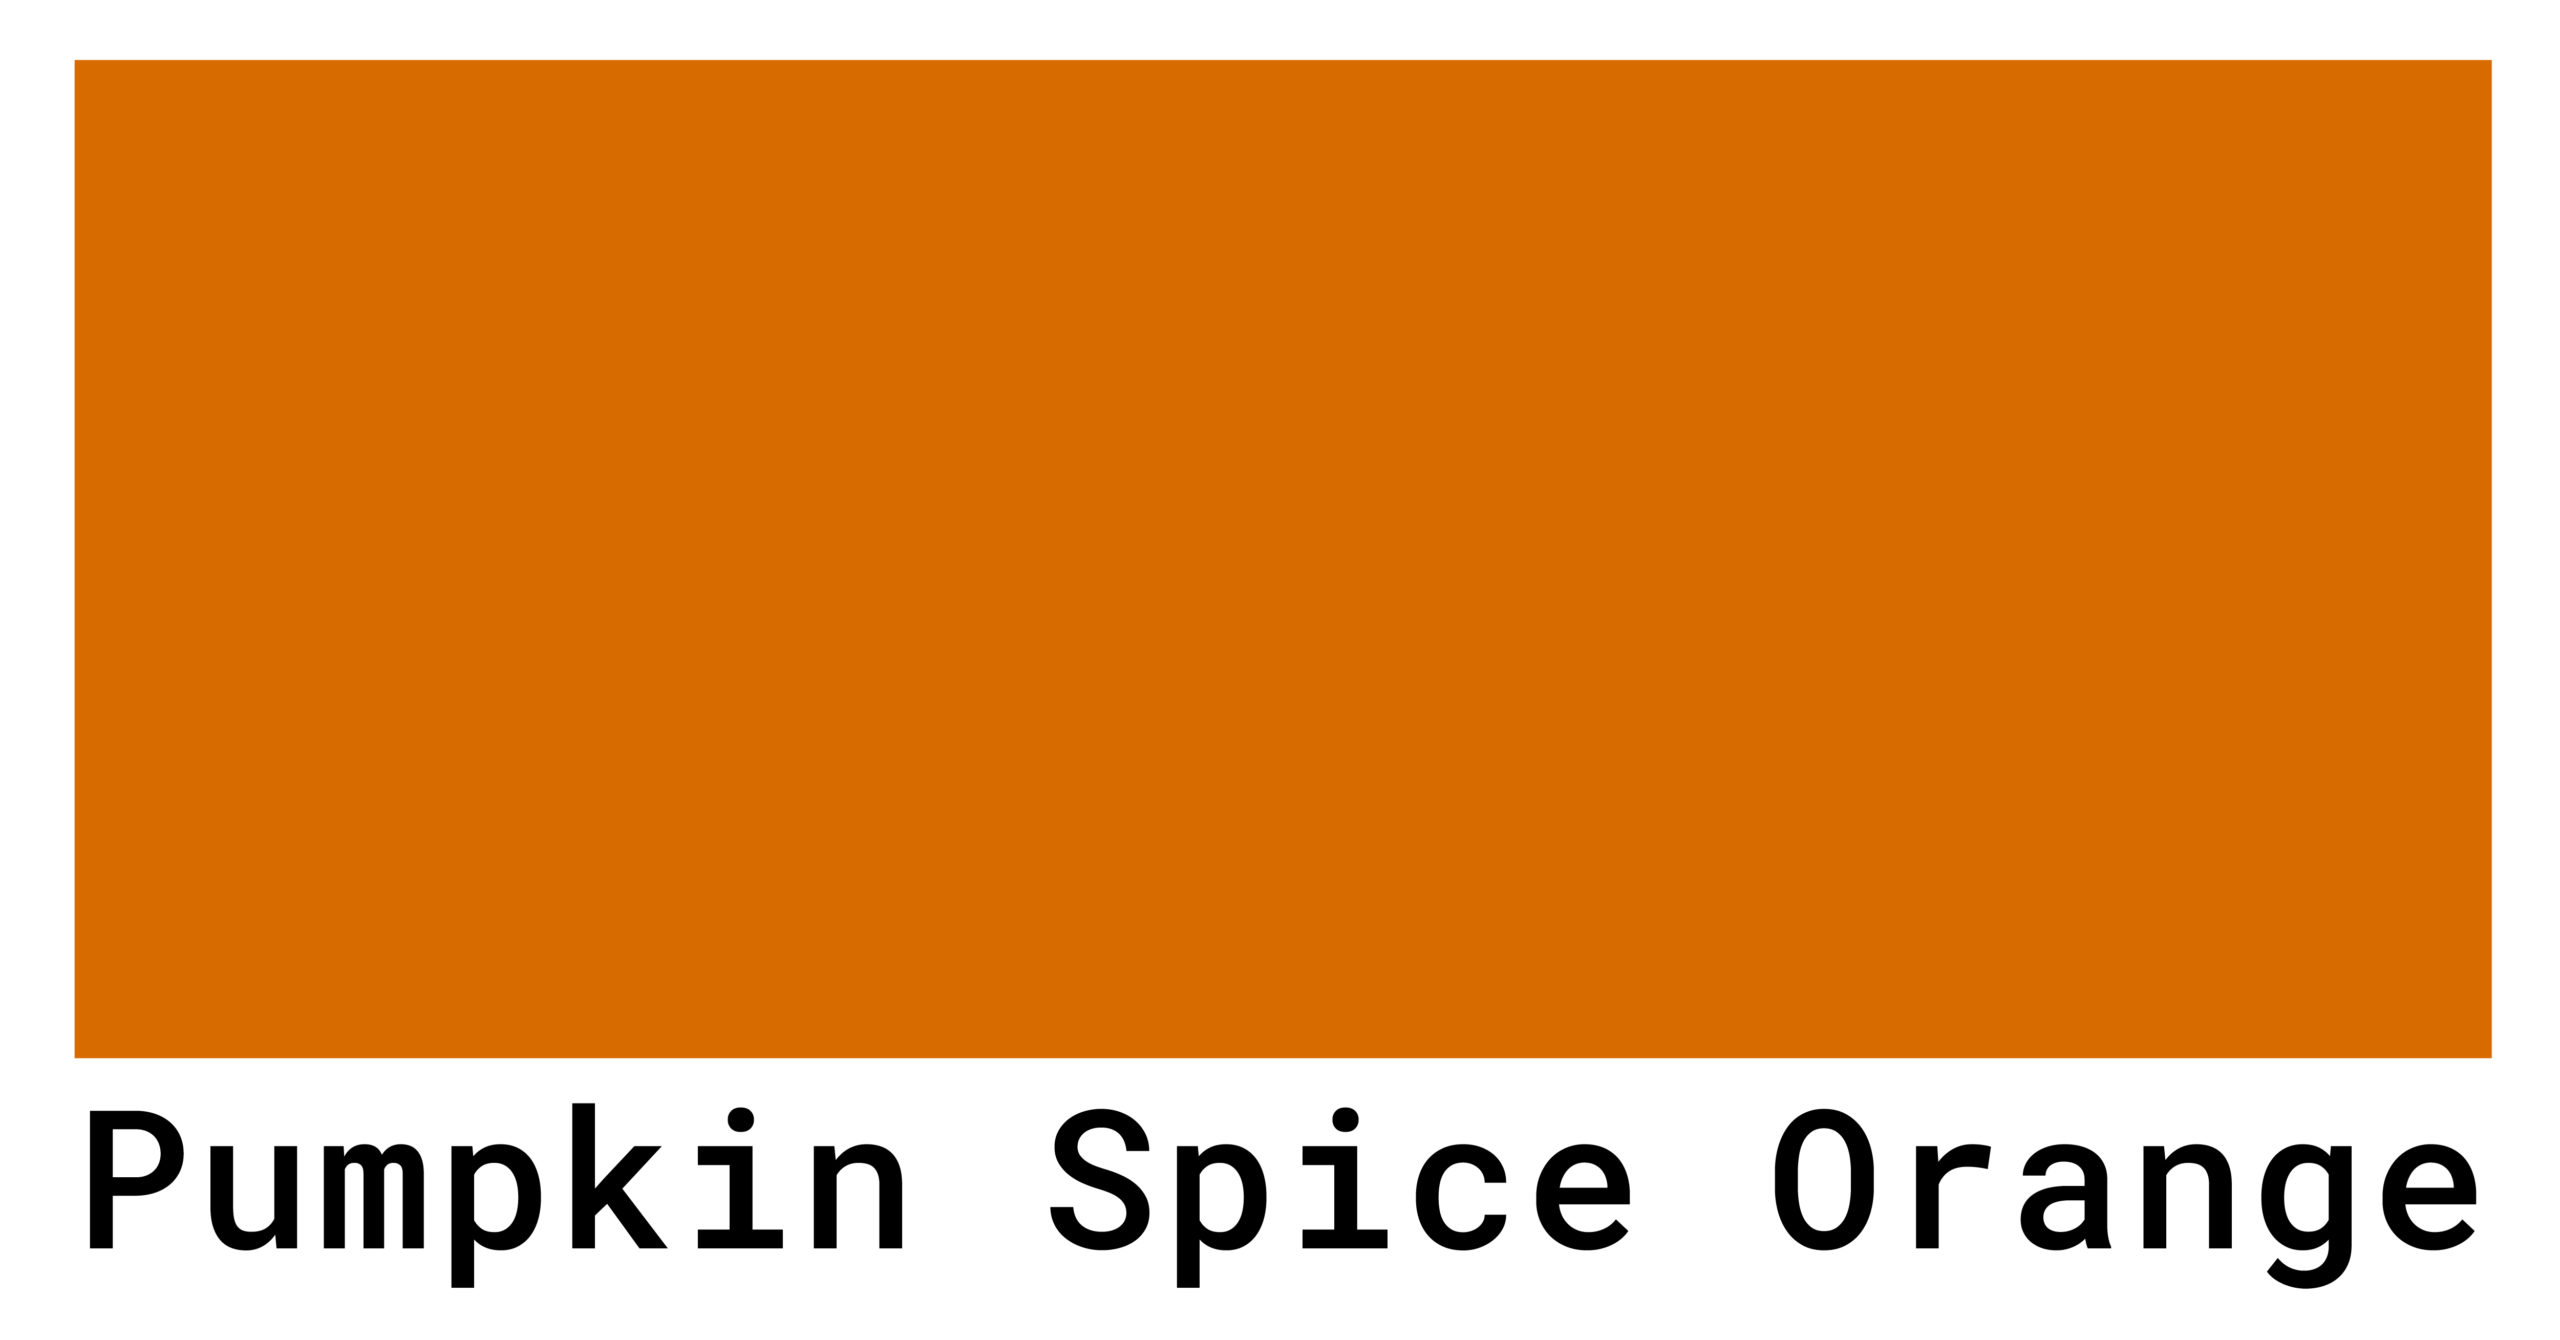 pumpkin-spice-orange-color-codes-the-hex-rgb-and-cmyk-values-that